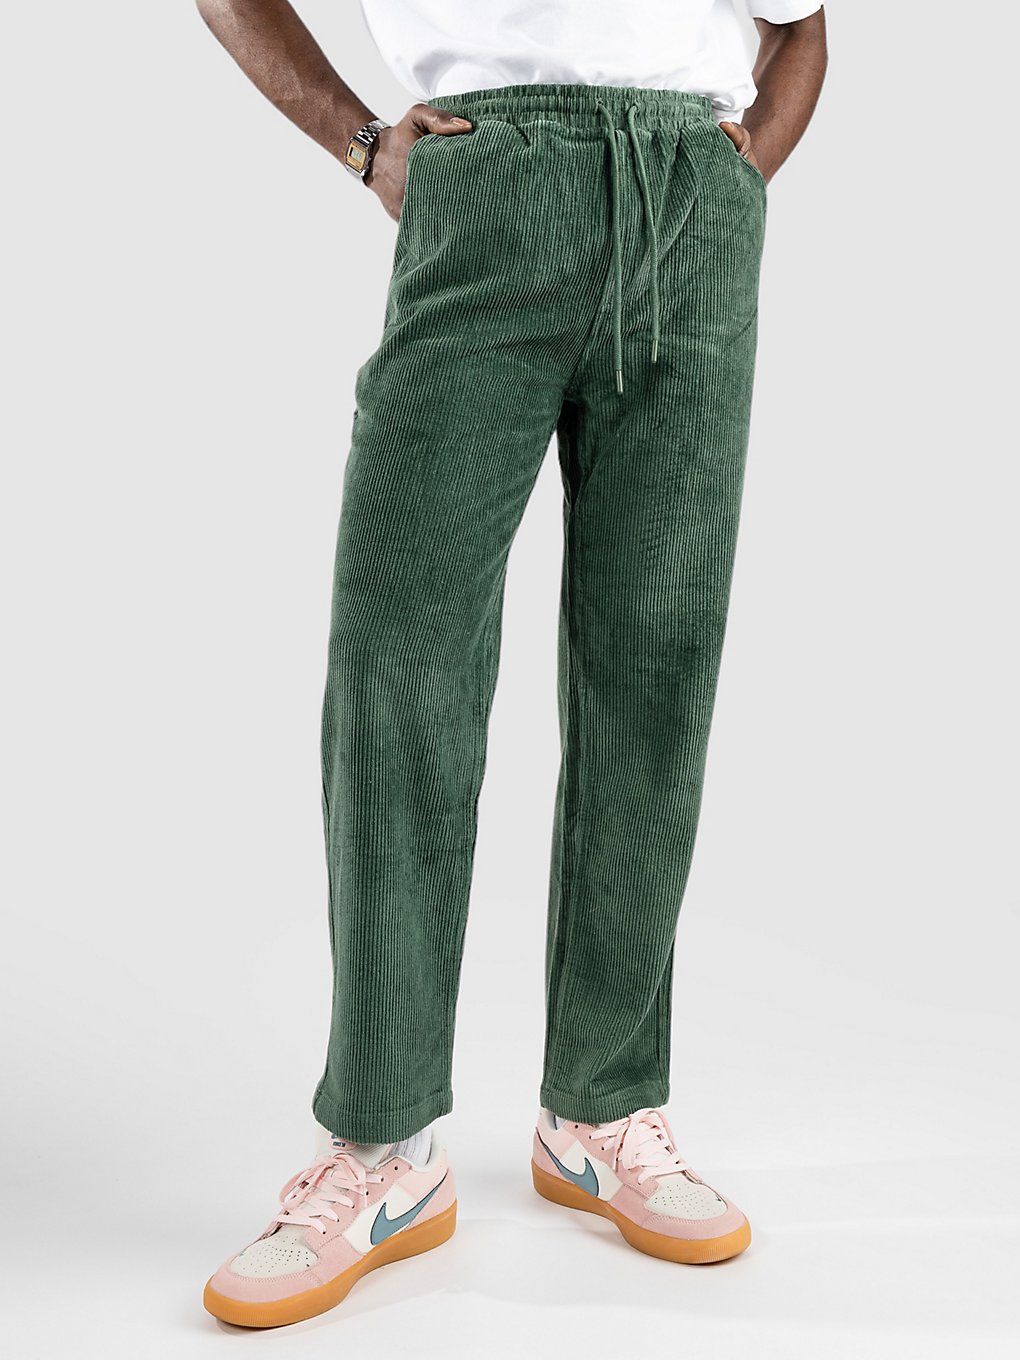 Blue Tomato Cord Relaxed Hose green kaufen